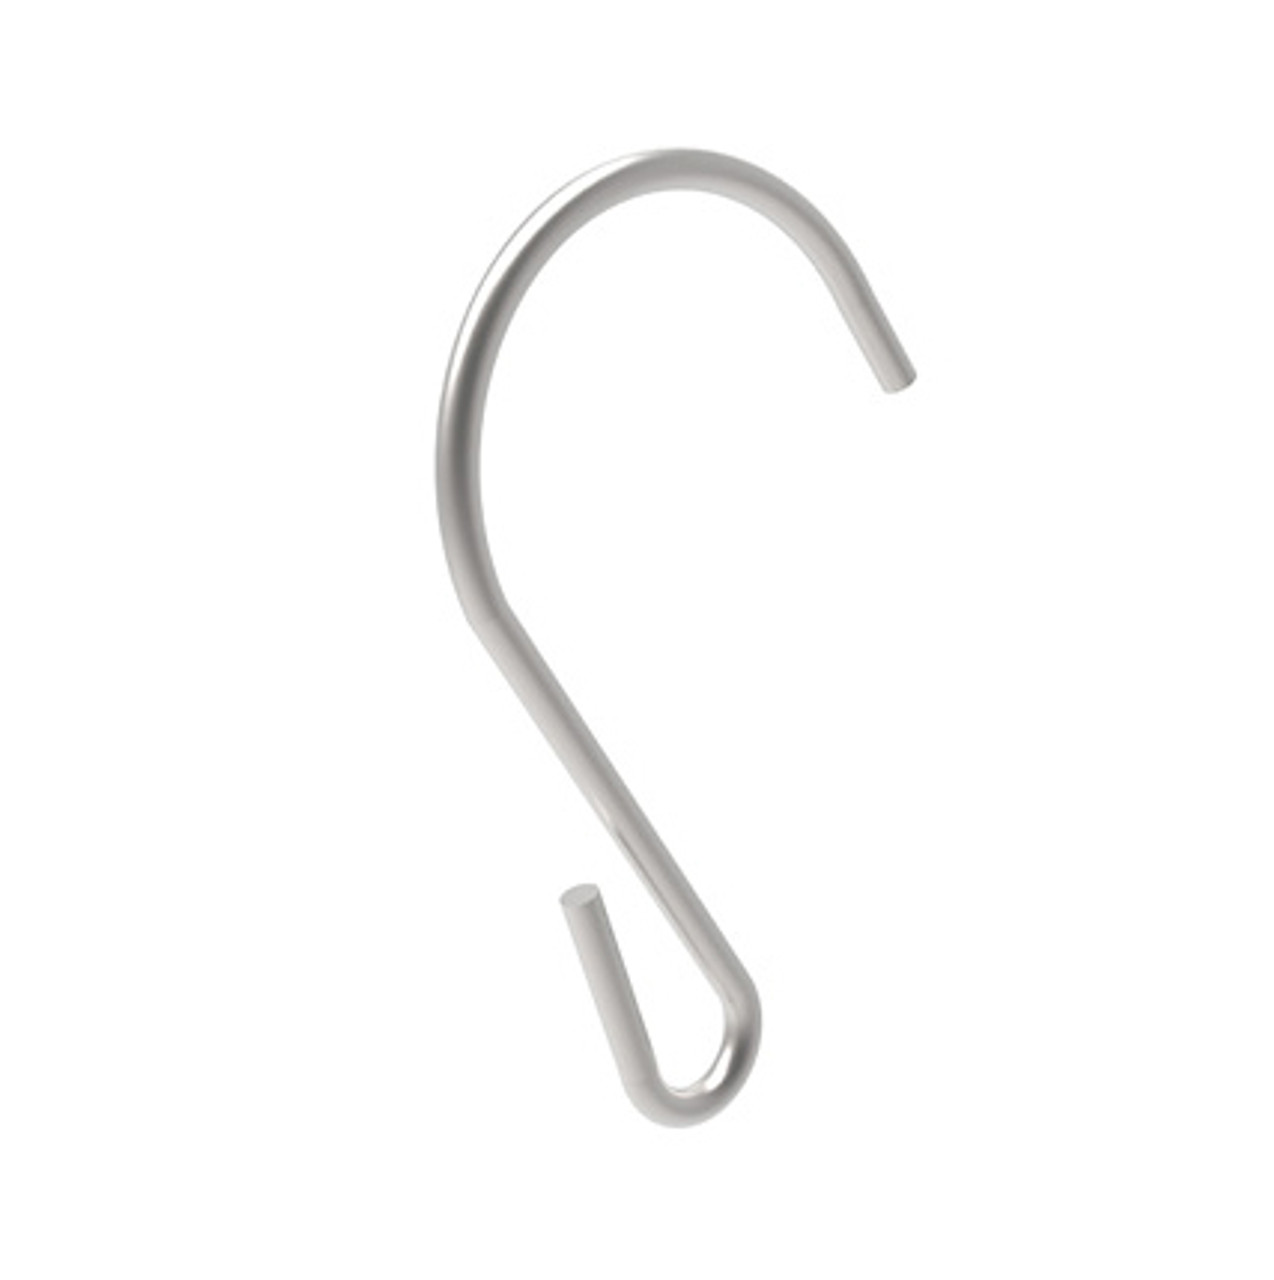 Metal S Crimped Hanging Hooks - 43 x 28mm - Pack of 100